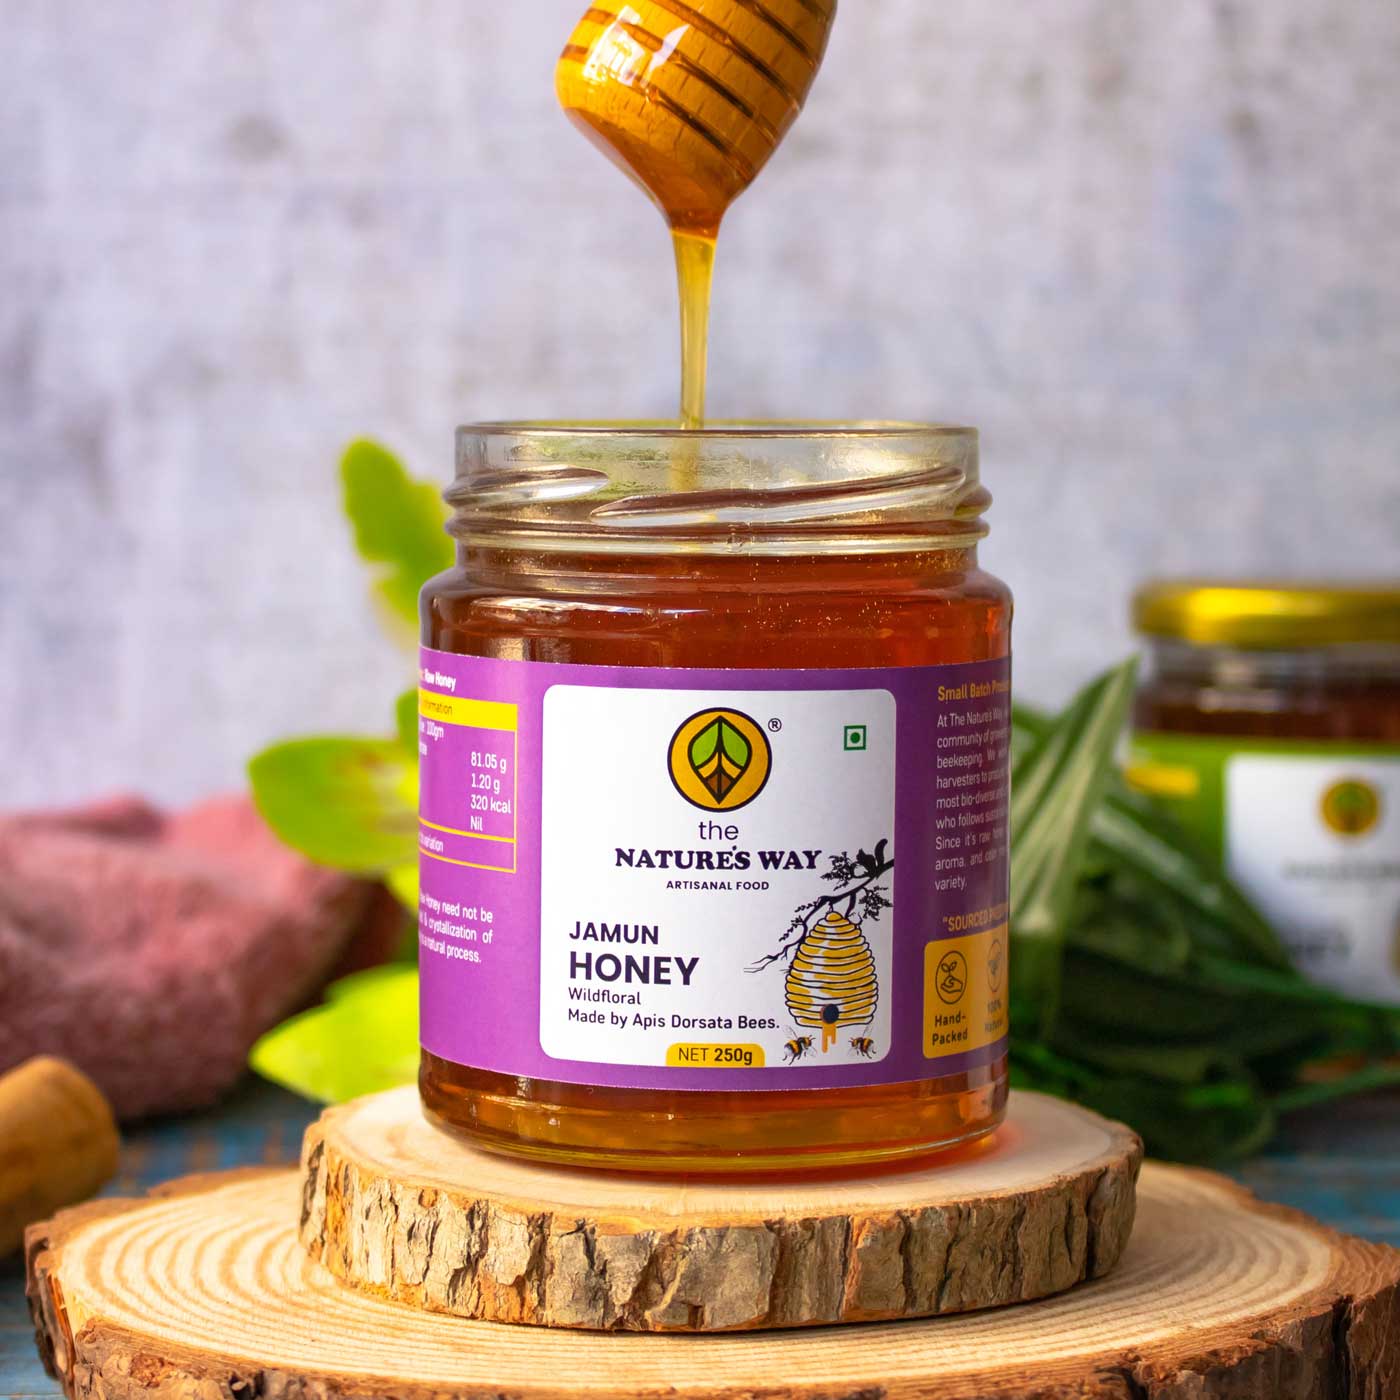 The Natures Way organic wild forest honey